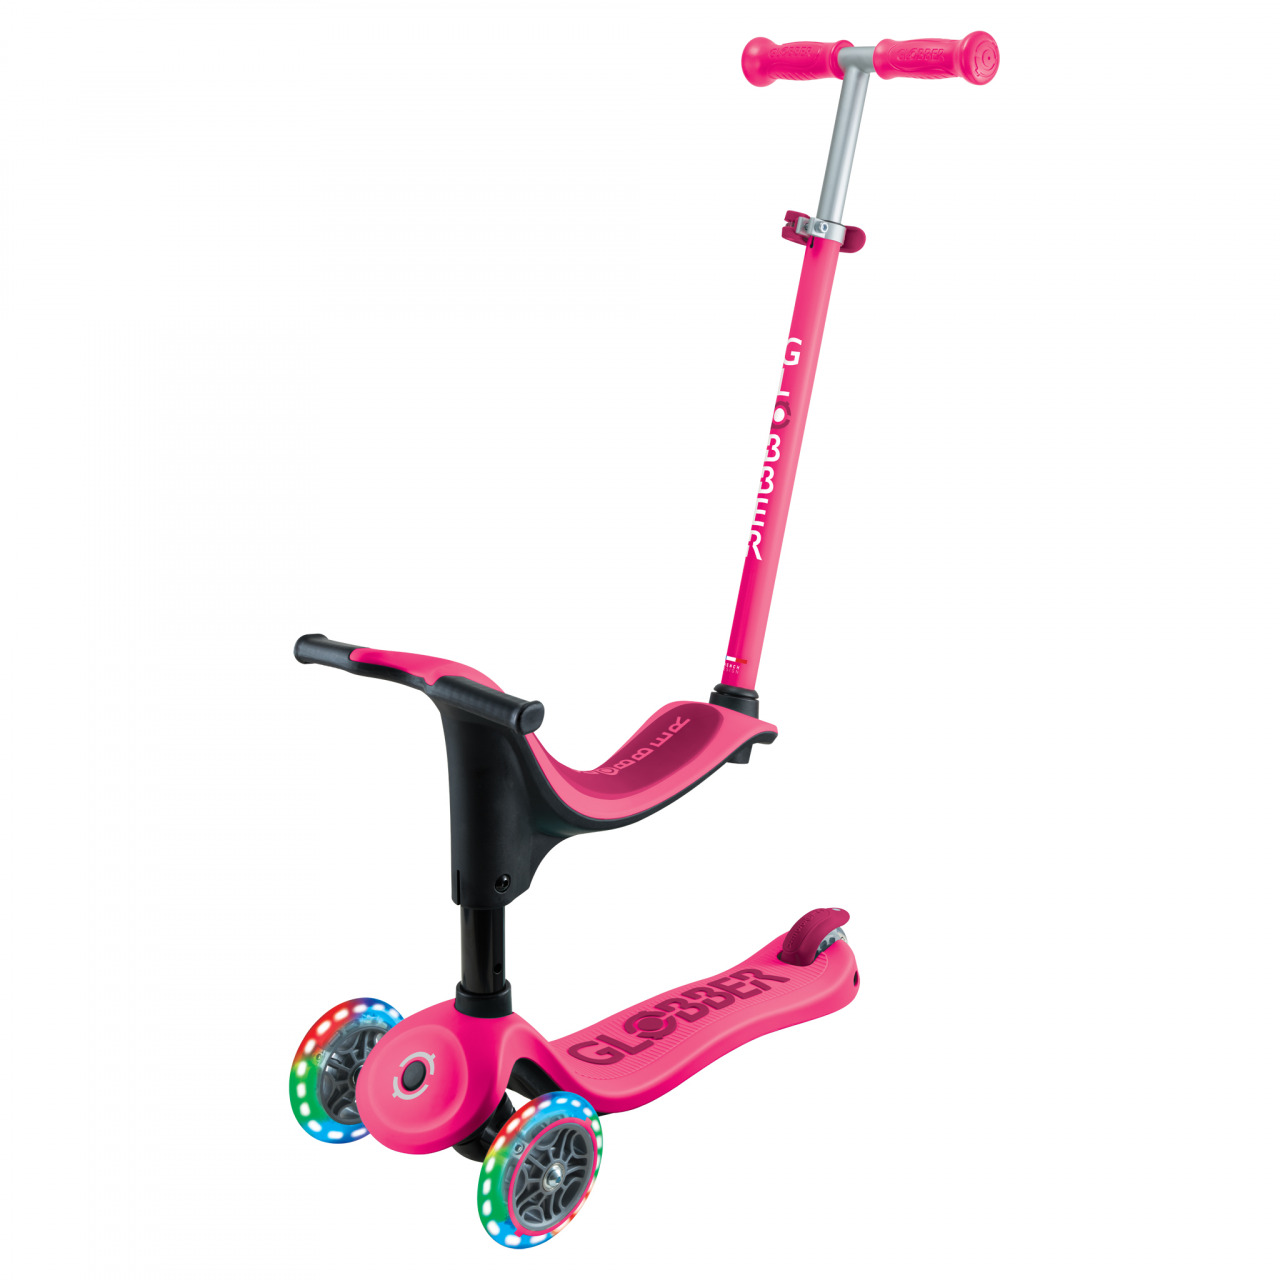 452 610 4 3 In 1 Light Up Scooter For Toddlers